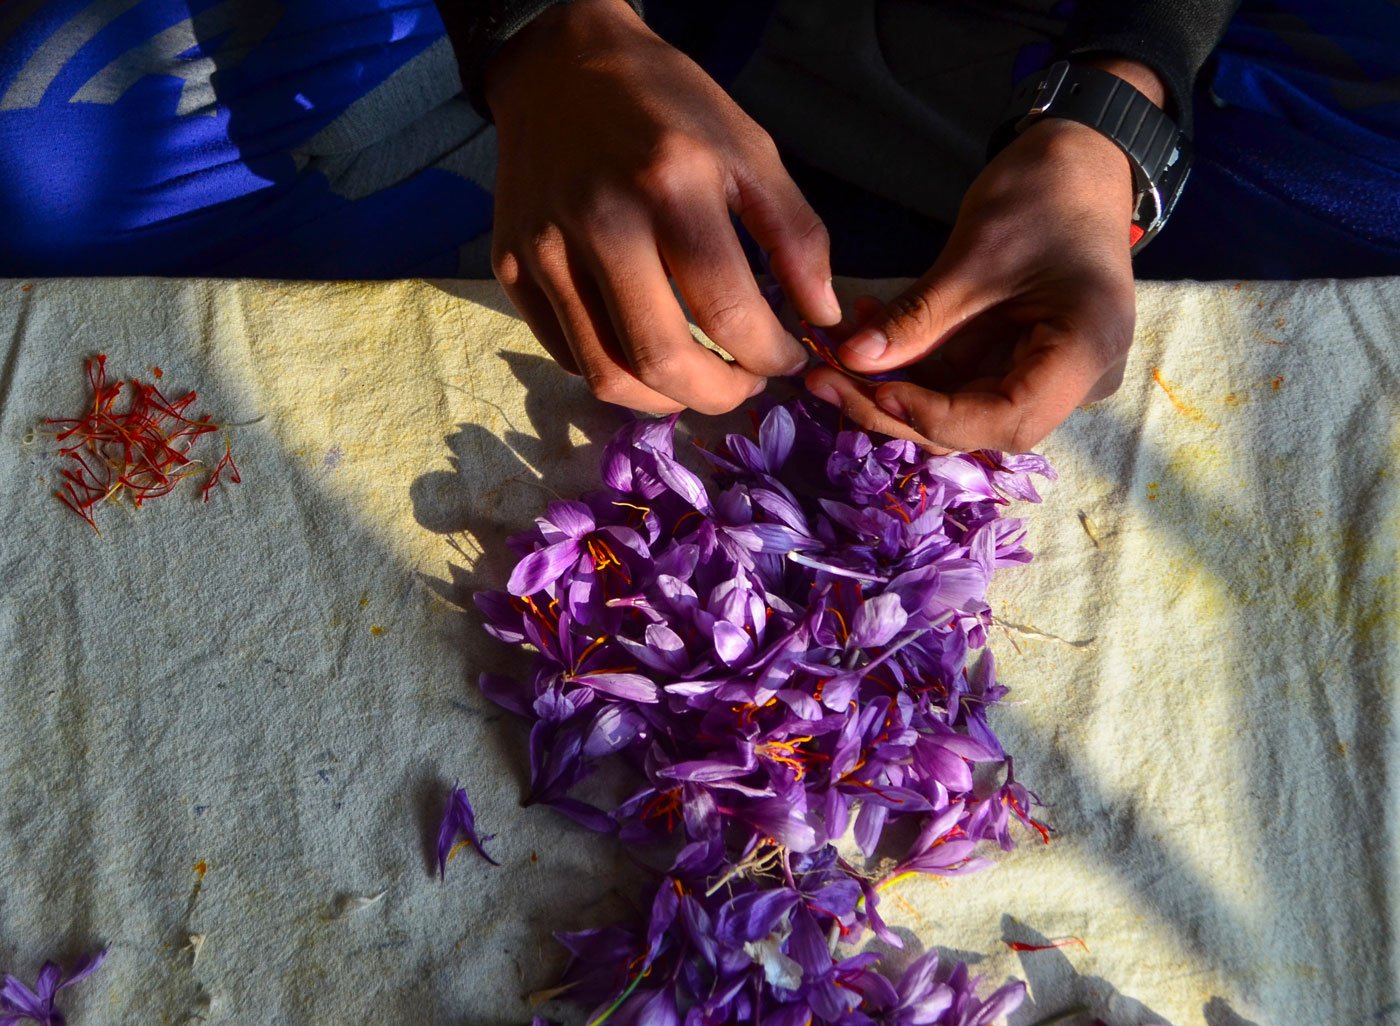 Abdul Rashid, 55, along with his son Fayaz, extracting the saffron strands from flowers at their home in the Khrew area of Pulwama. He says removing the strand from the flower is an art. “You have to be very skillful to take out the correct strand from the flower, otherwise you will ruin it.”